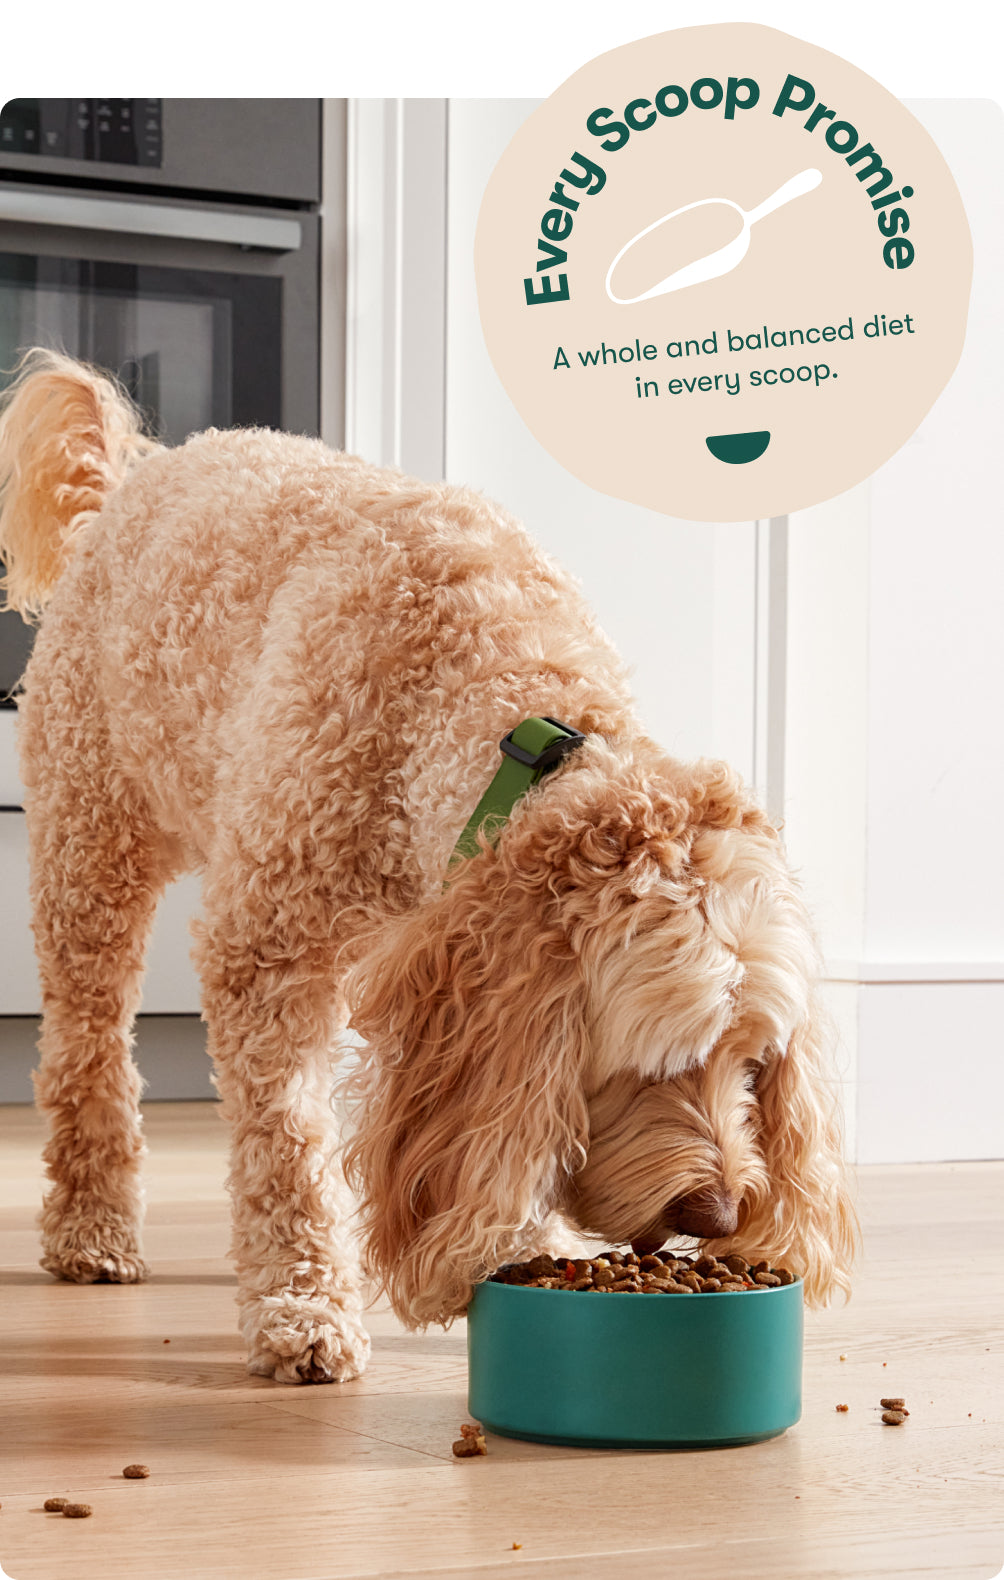 A dog eating from a green bowl with an "every scoop promise" badge overlayed on the image